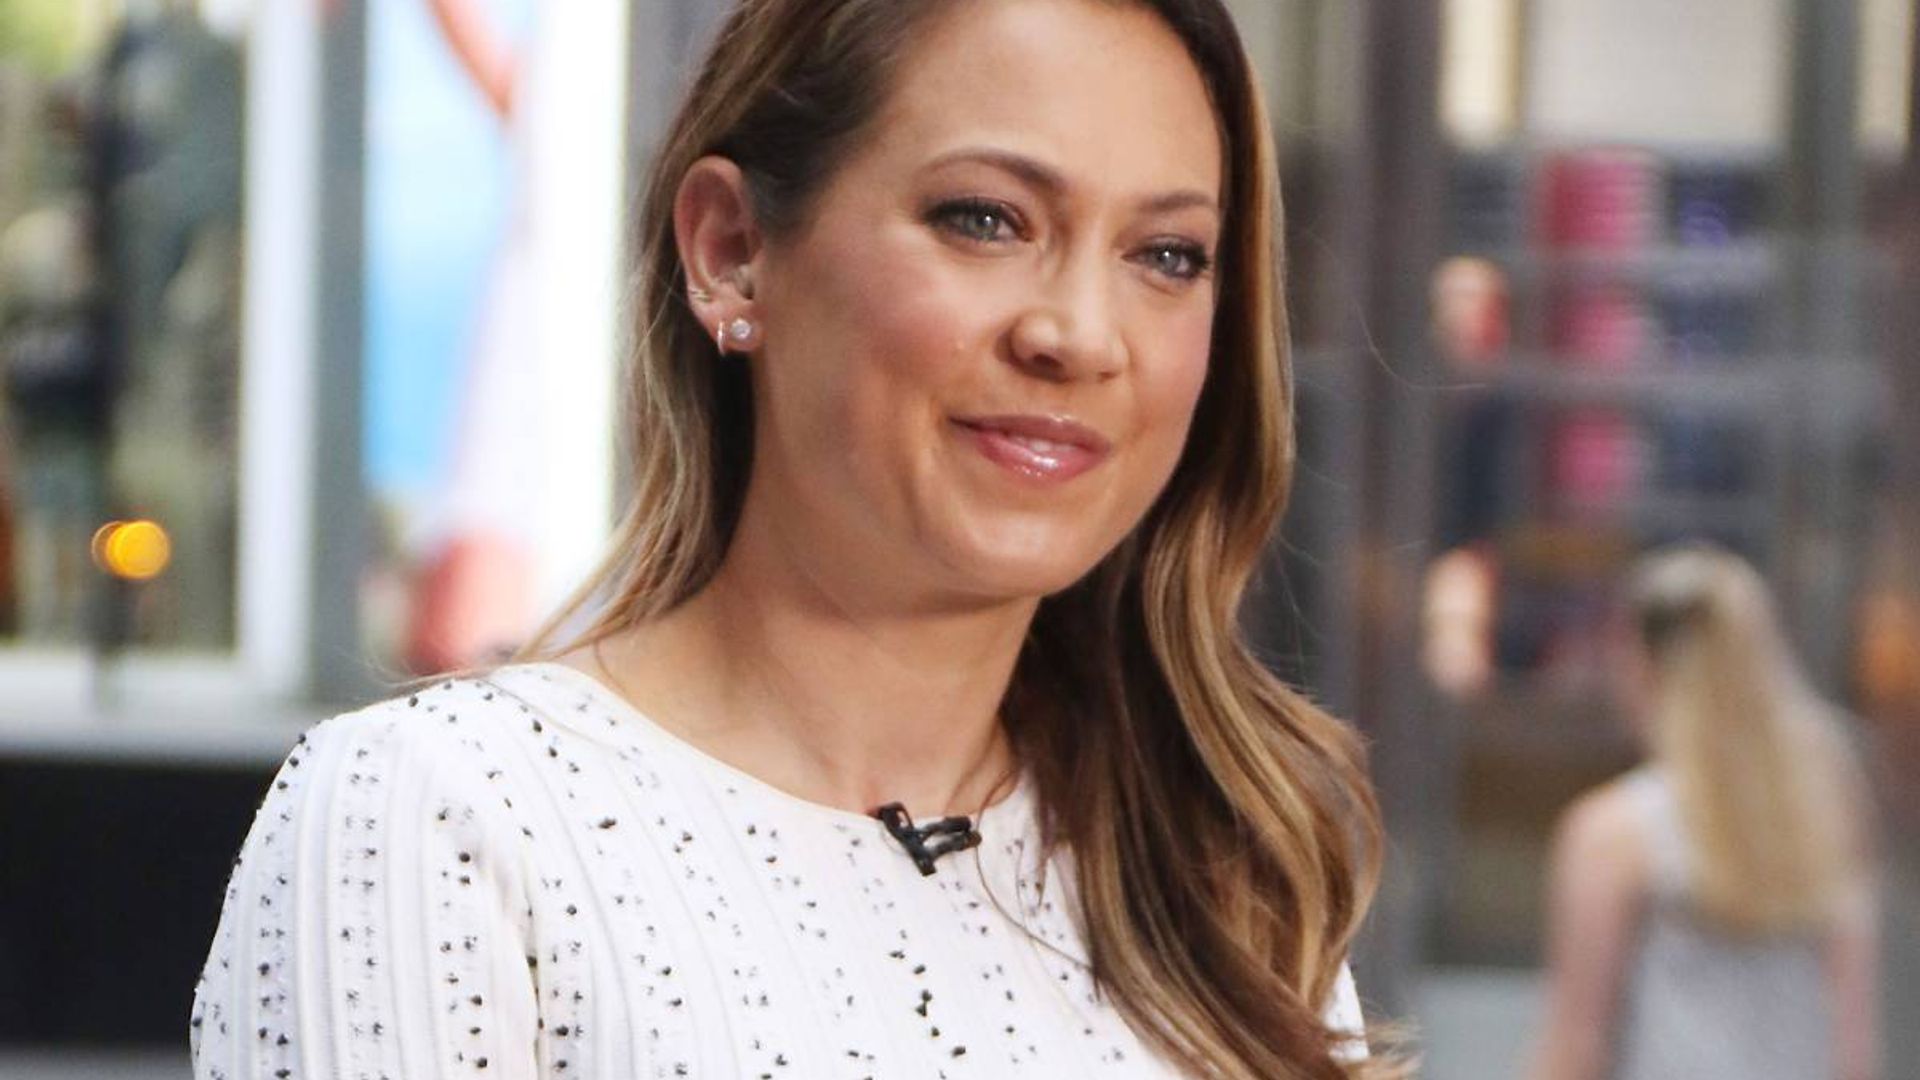 Ginger Zee surprised live on air by her co-stars as she marks special occasion